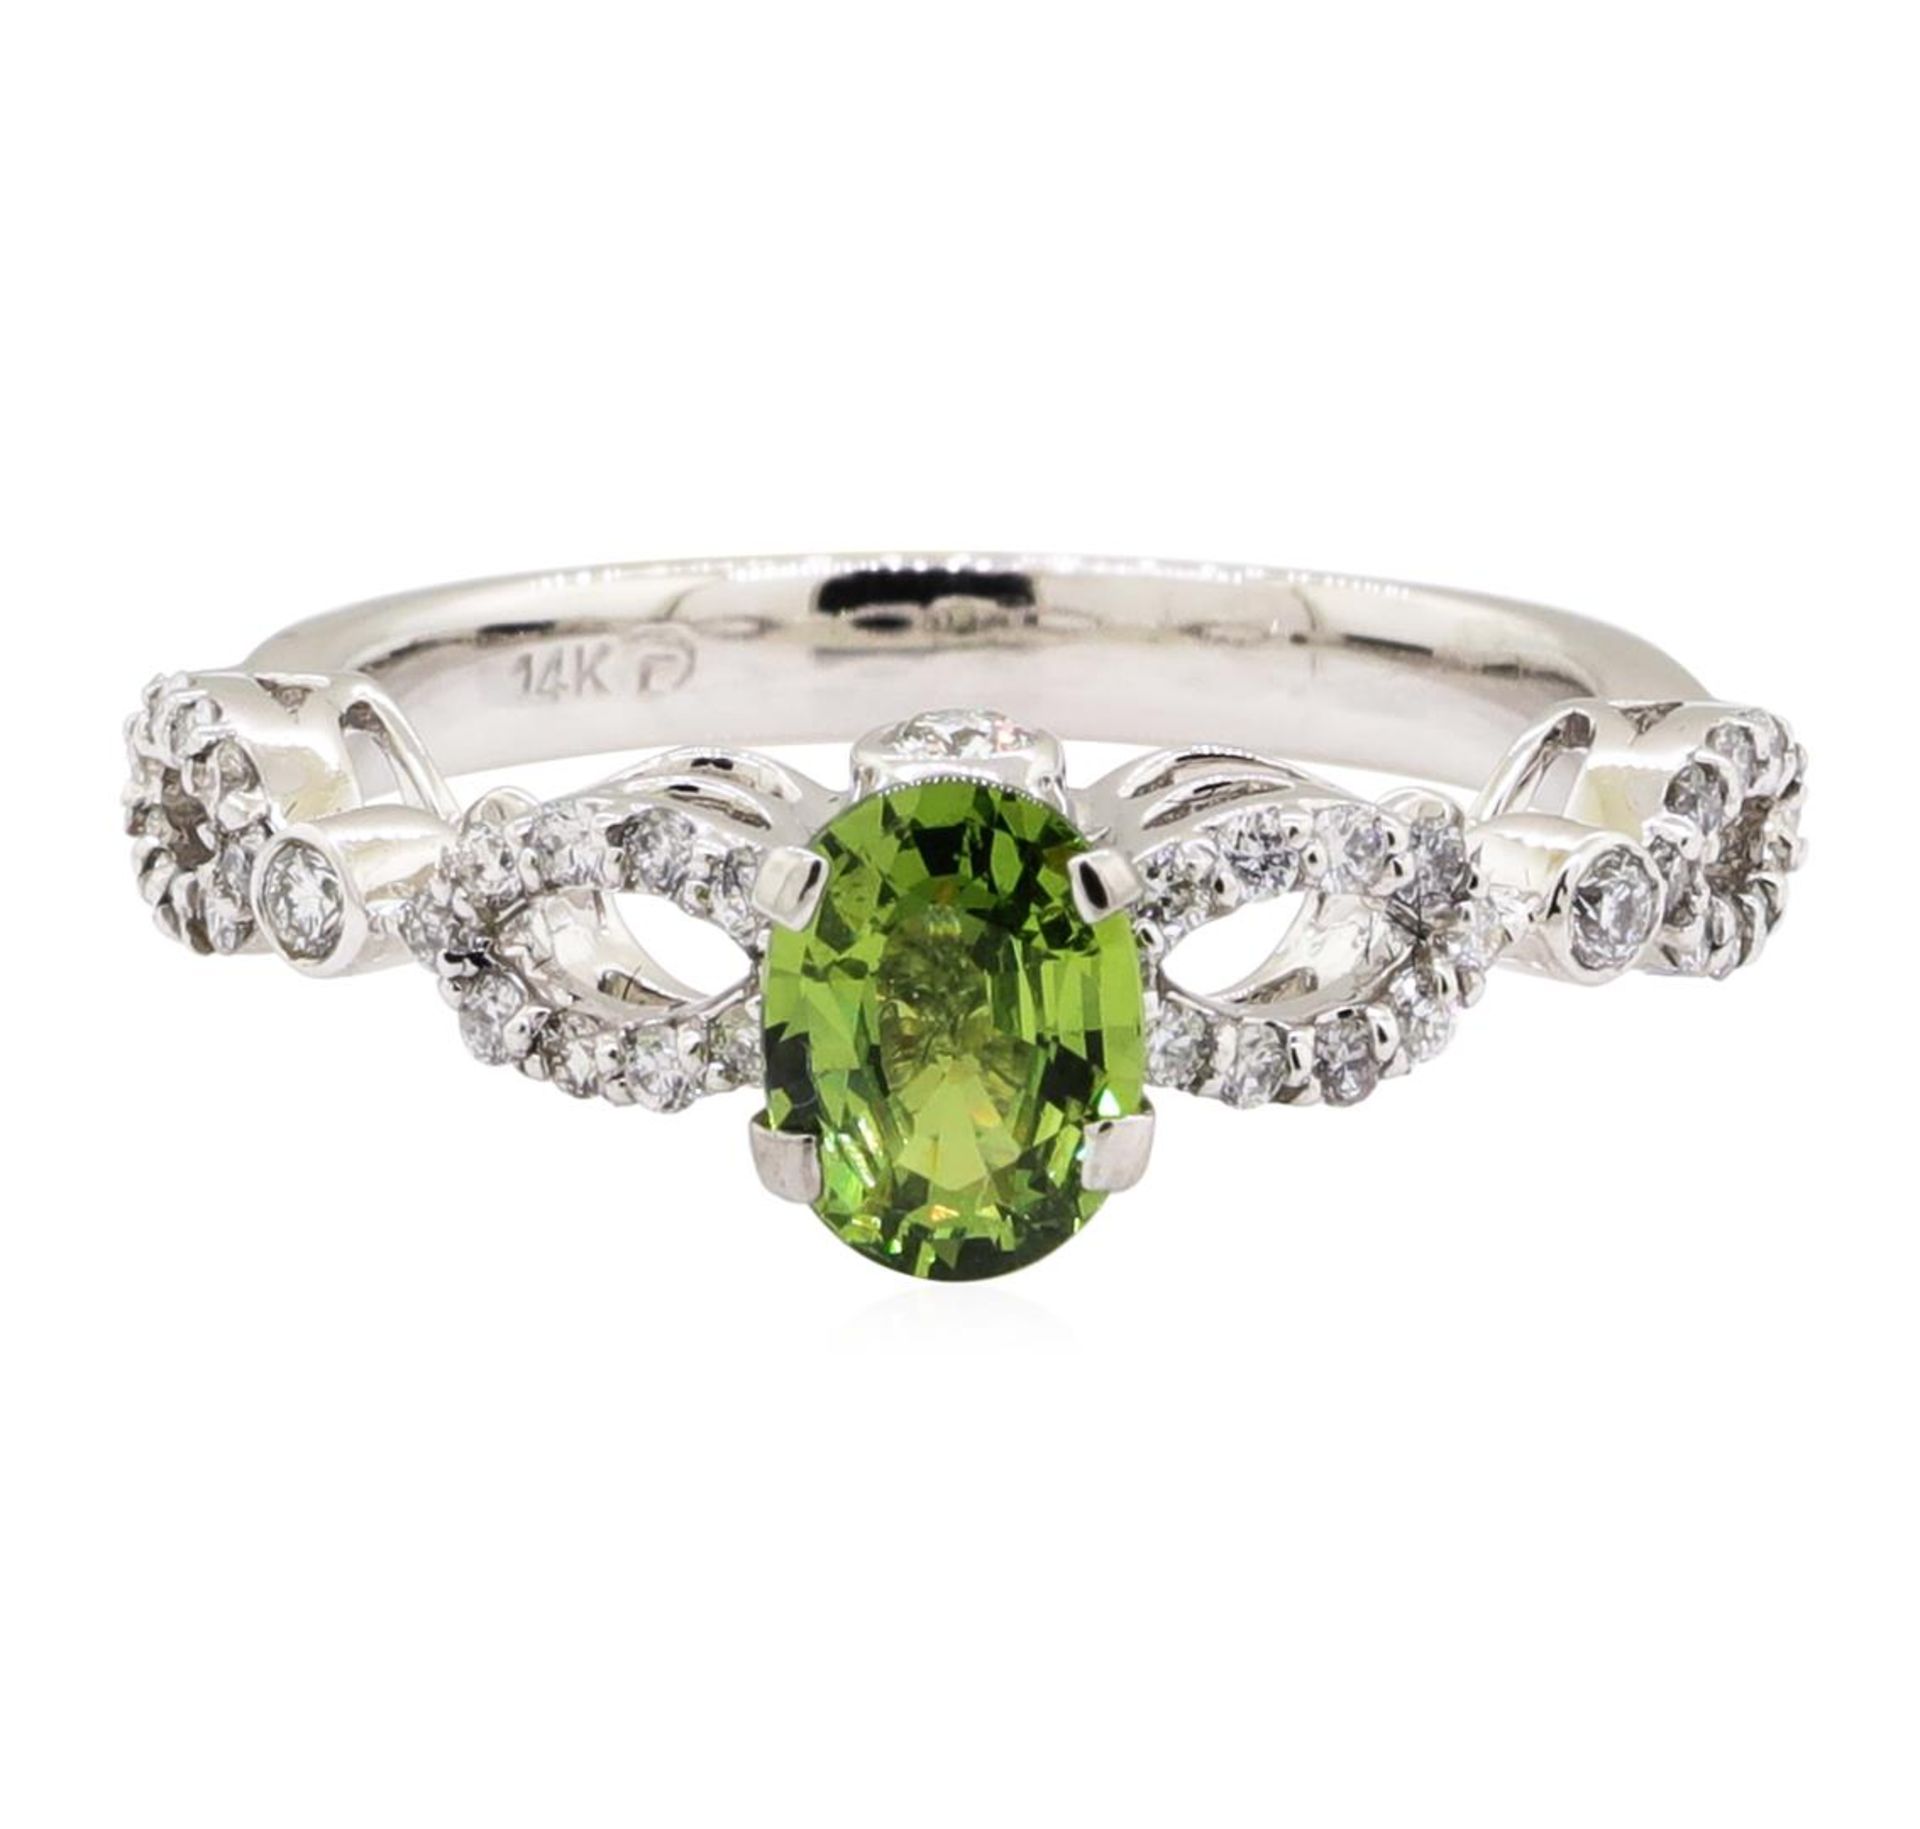 1.24 ctw Oval Mixed Demantoid Garnet And Round Brilliant Cut Diamond Ring - 14KT - Image 2 of 5